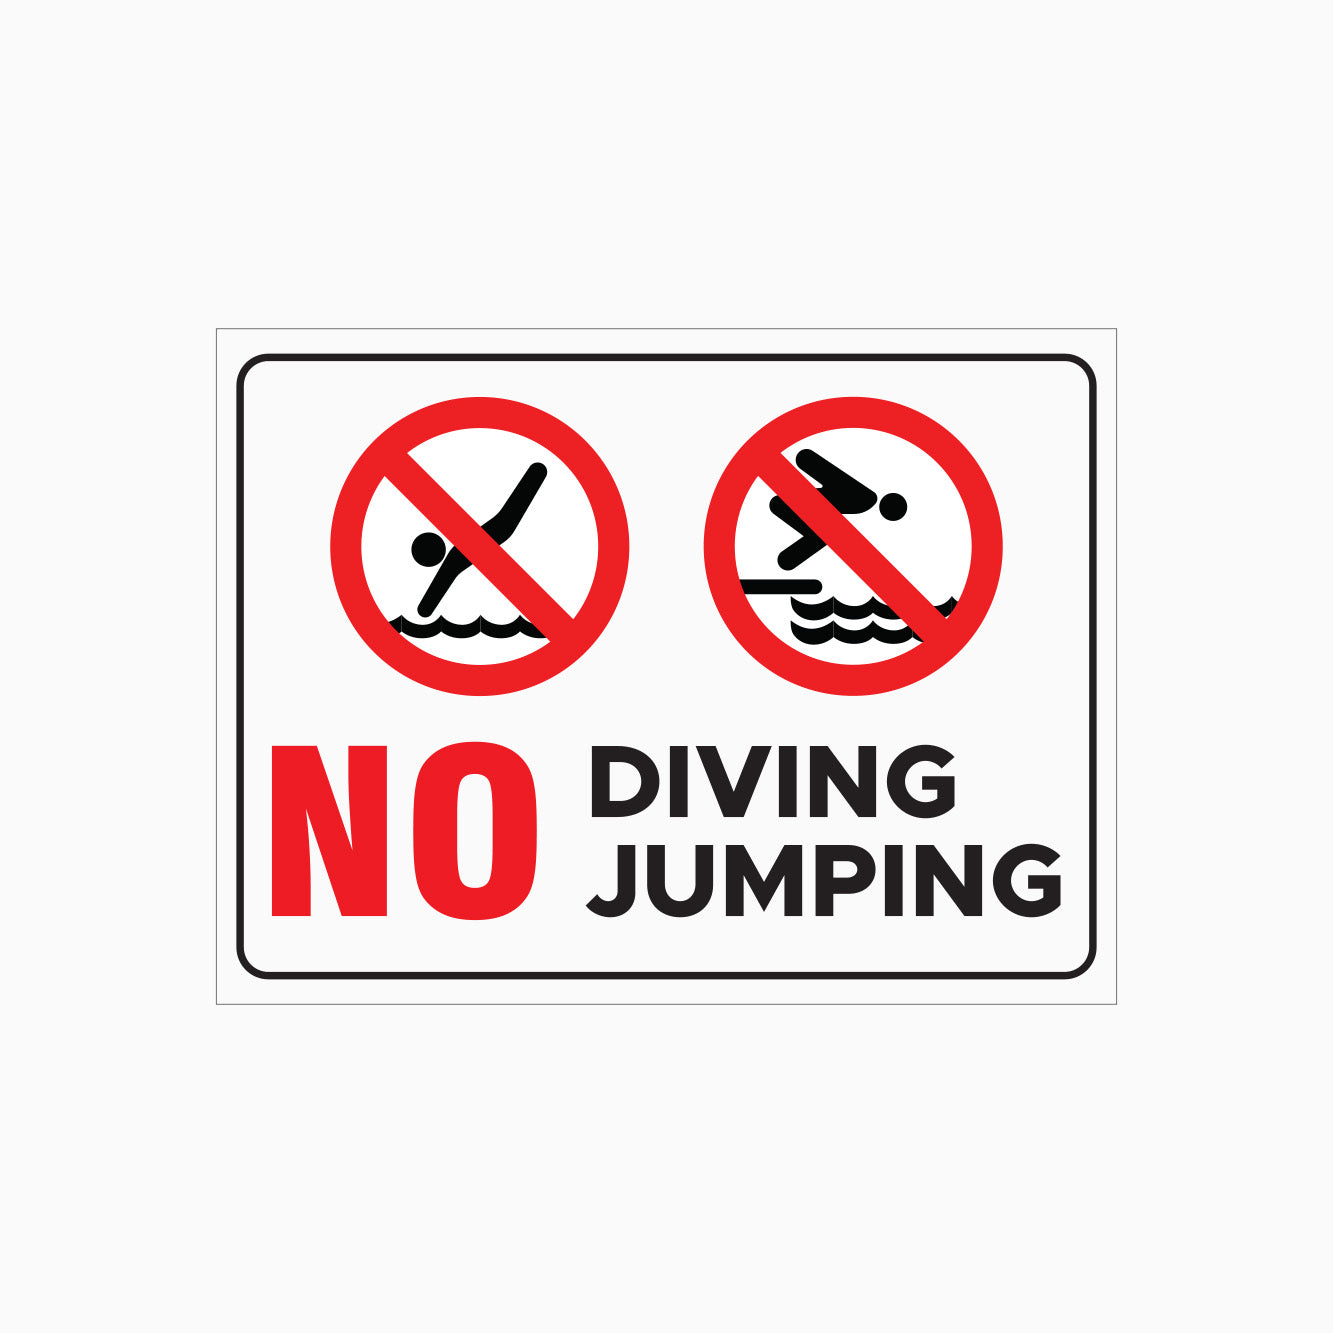 NO DIVING or JUMPING IN POOL SIGN - GET SIGNS